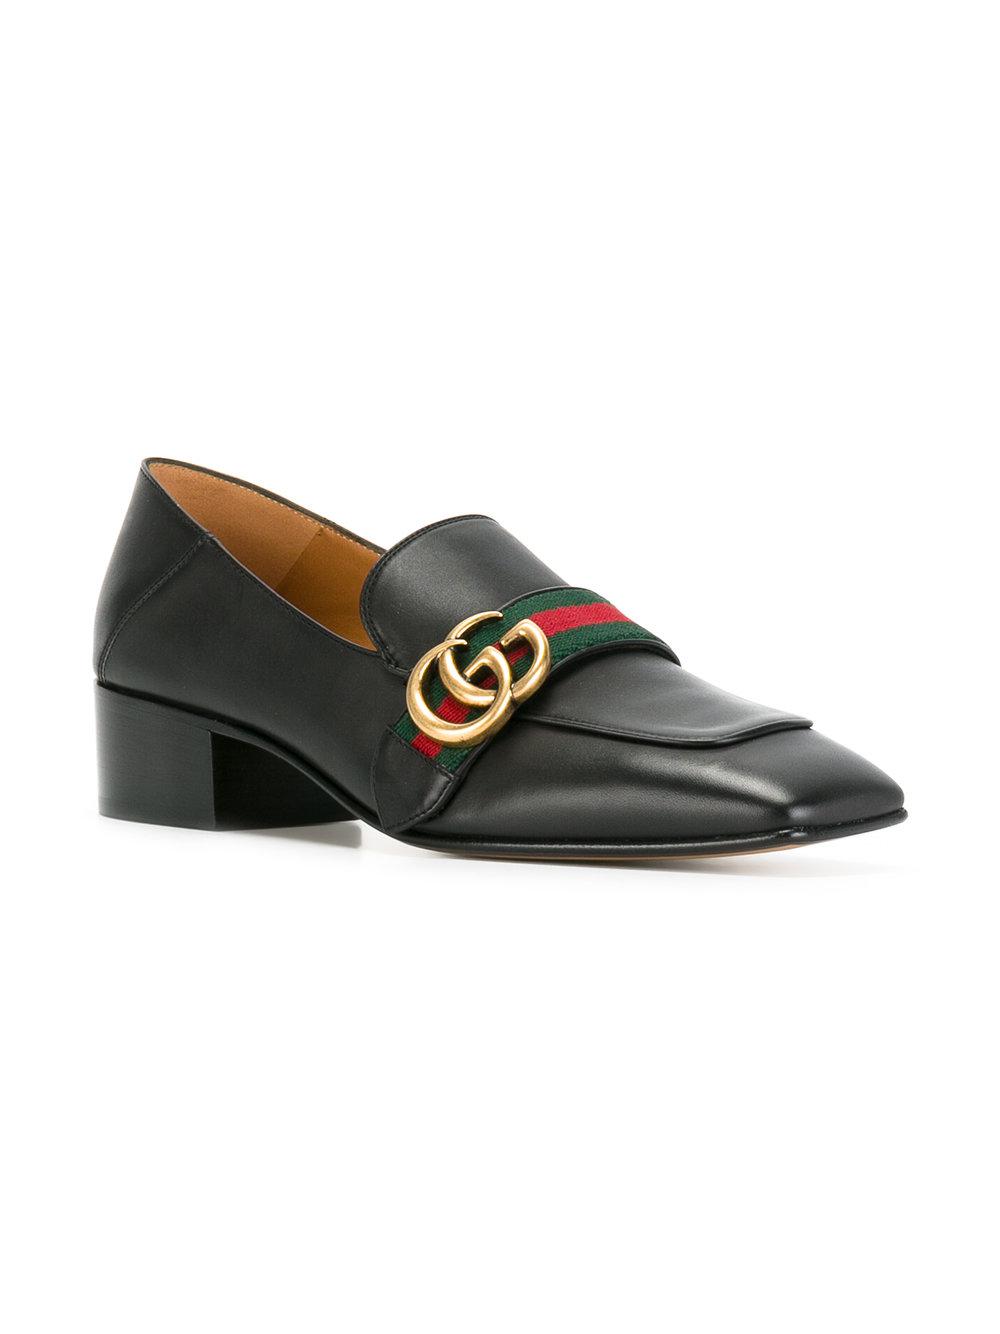 Gucci Gg Web Low-heel Loafer Pumps in Black - Lyst